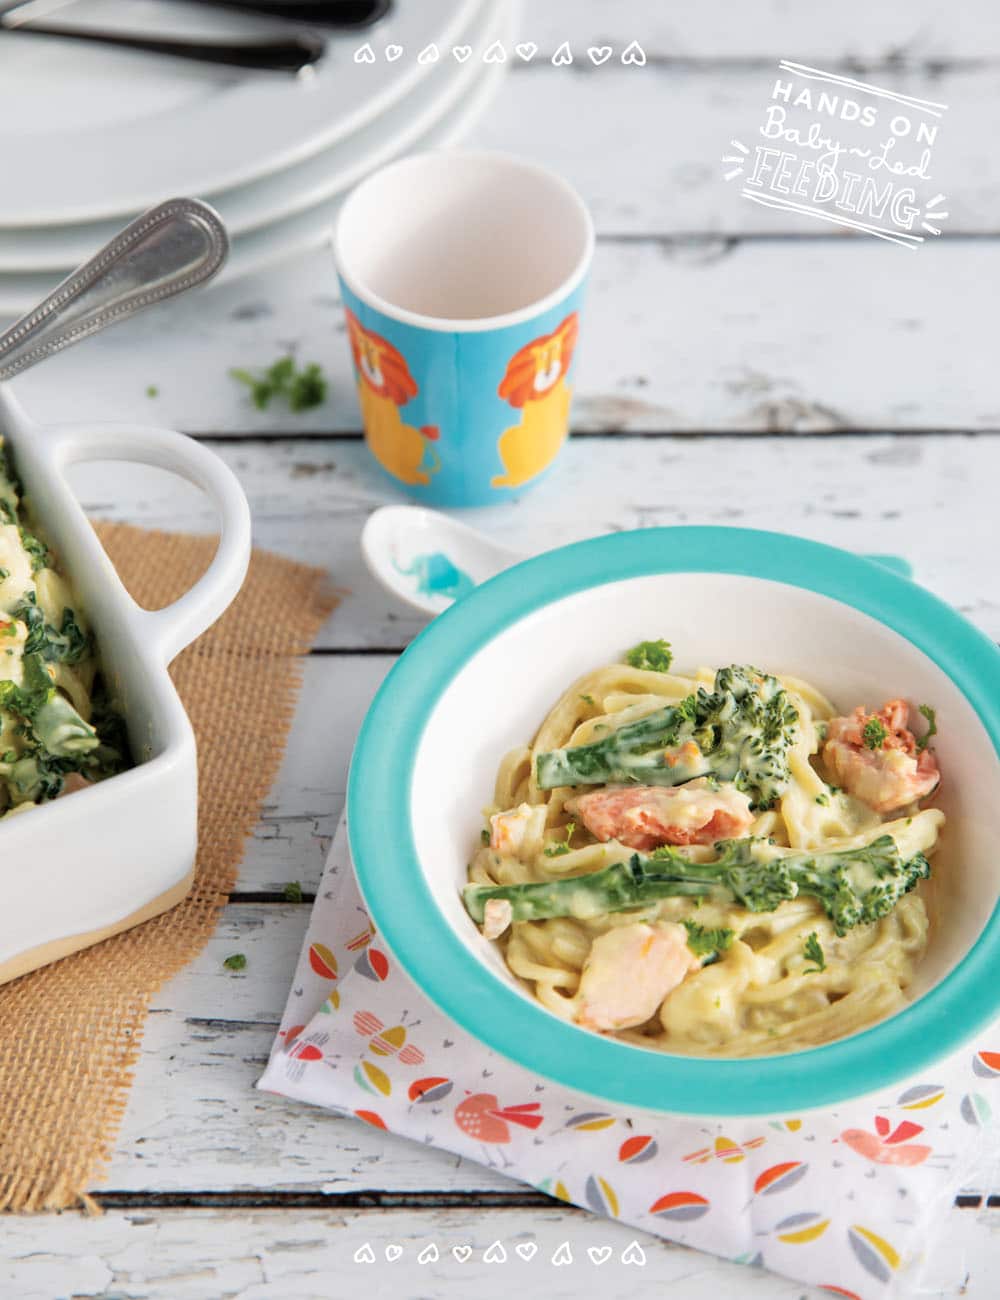 Baby Led Weaning friendly creamy seafood pasta with crushed garlic, Irish cream, tenderstem broccoli, and kale. An easy healthy recipe for the entire family that is loaded with Omega 3s, vitamin C, A, and K! #babyledweaning #babyledfeeding #pasta #seafood #seafoodpasta #familyfood